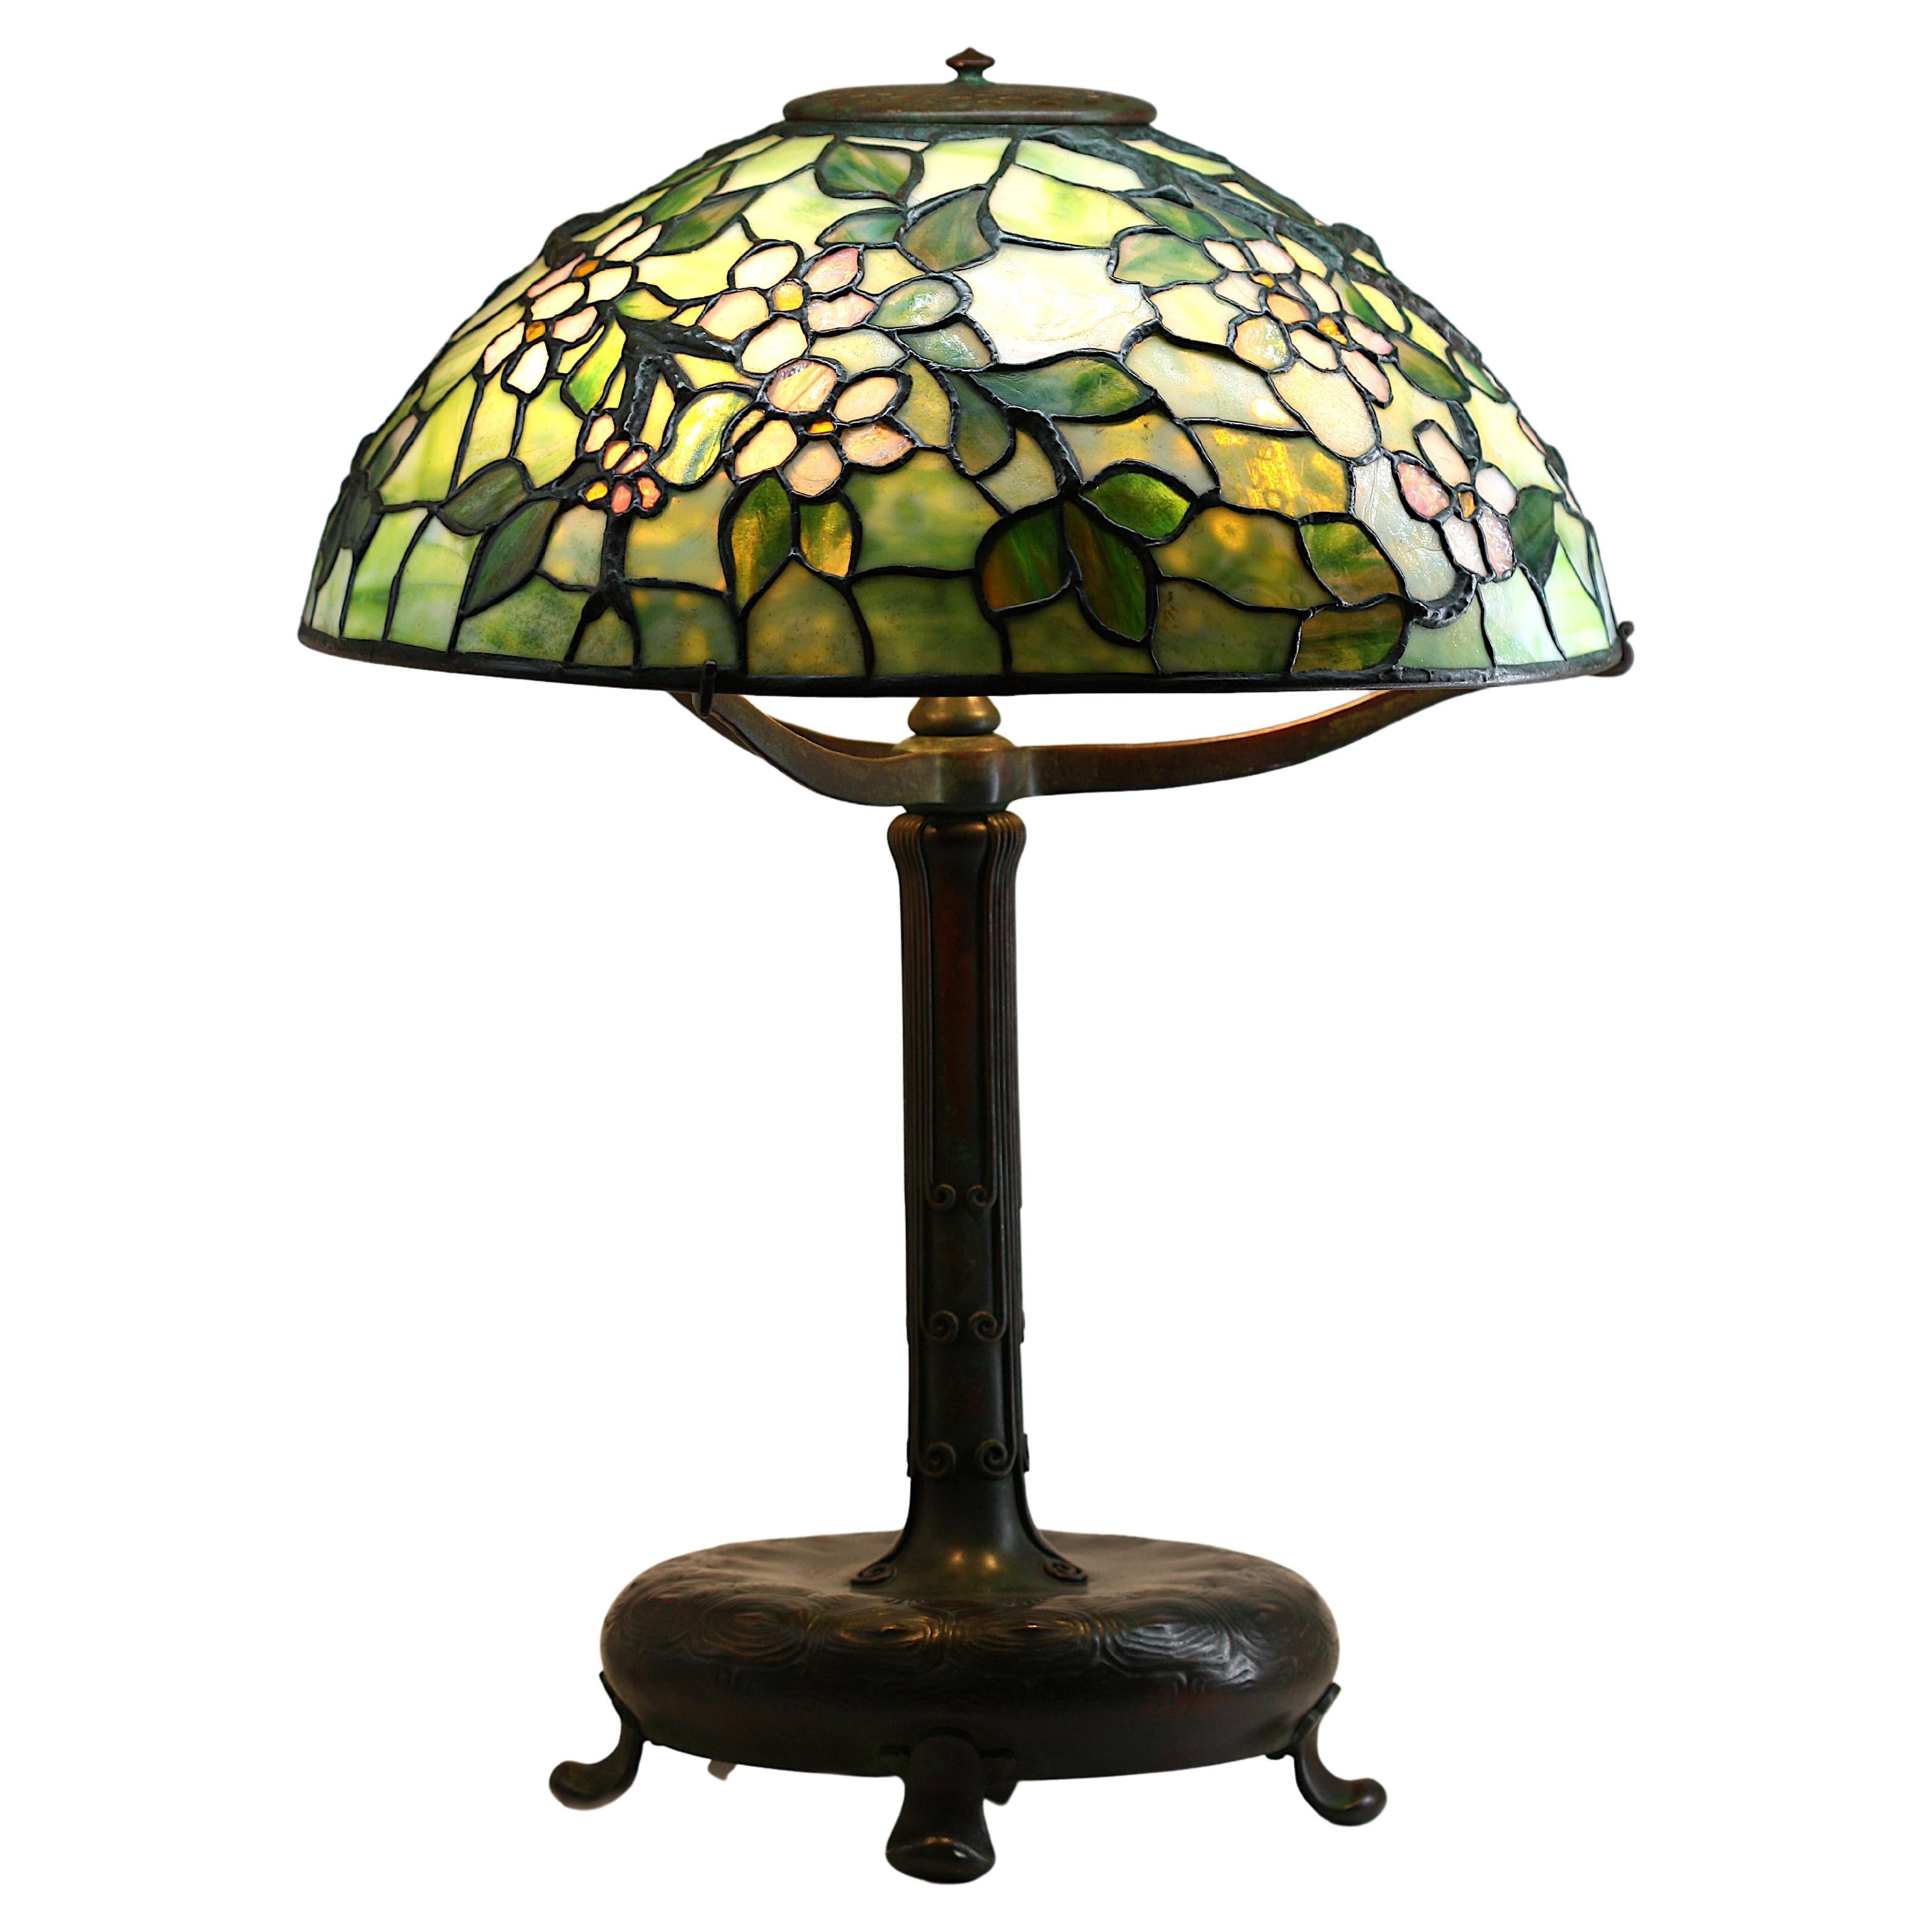 TIFFANY STUDIOS (1899-1920) "Apple Blossom" Leaded Glass and Bronze Table Lamp 